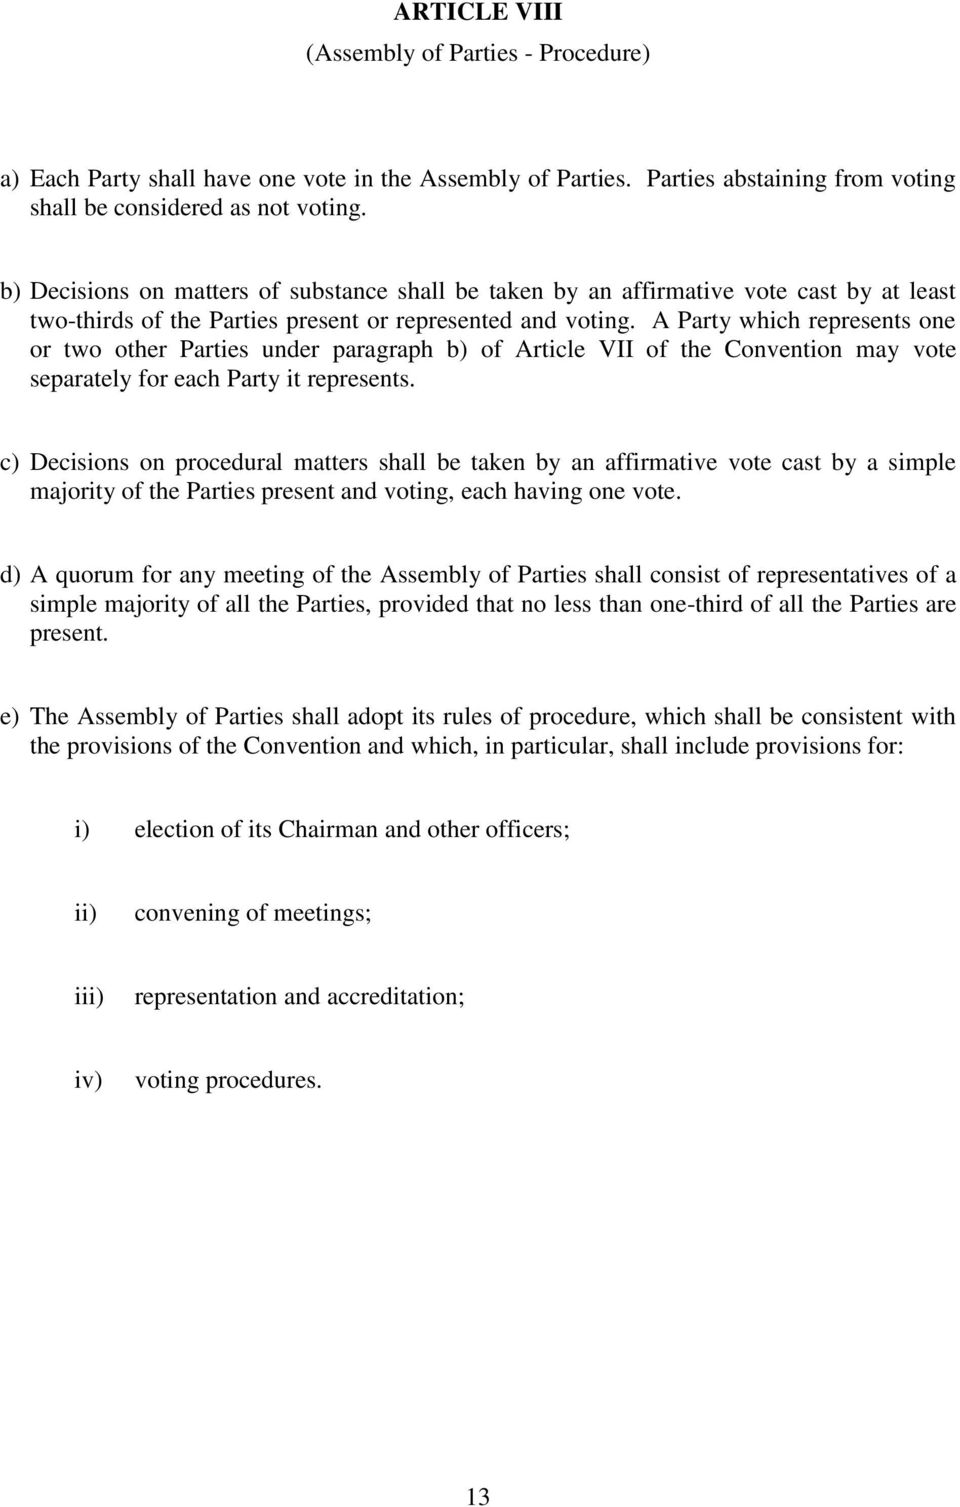 A Party which represents one or two other Parties under paragraph b) of Article VII of the Convention may vote separately for each Party it represents.